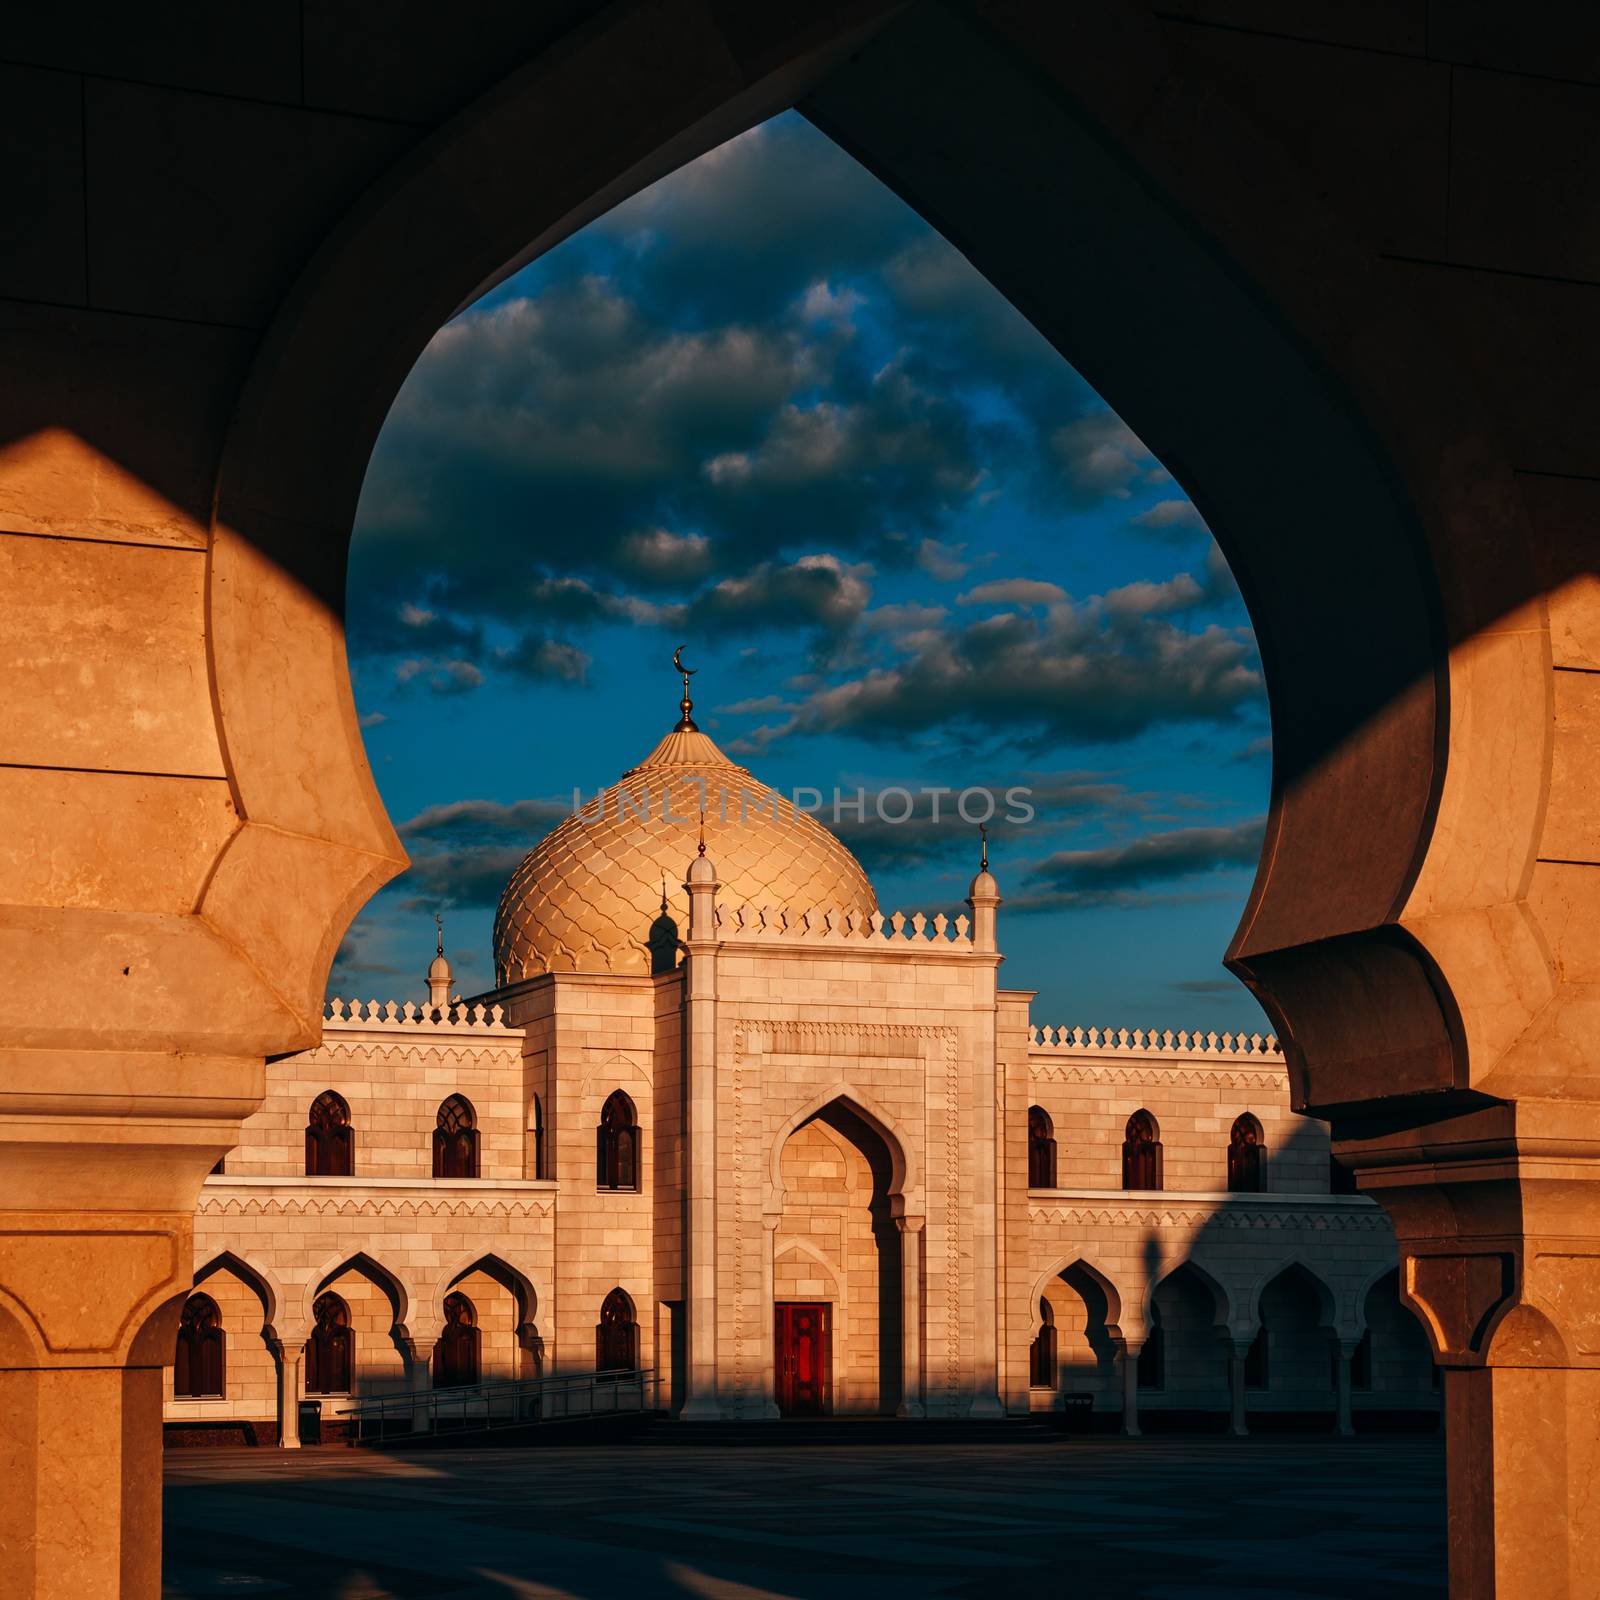 Beautiful White Mosque in the Sunset Light. View through the Arch.